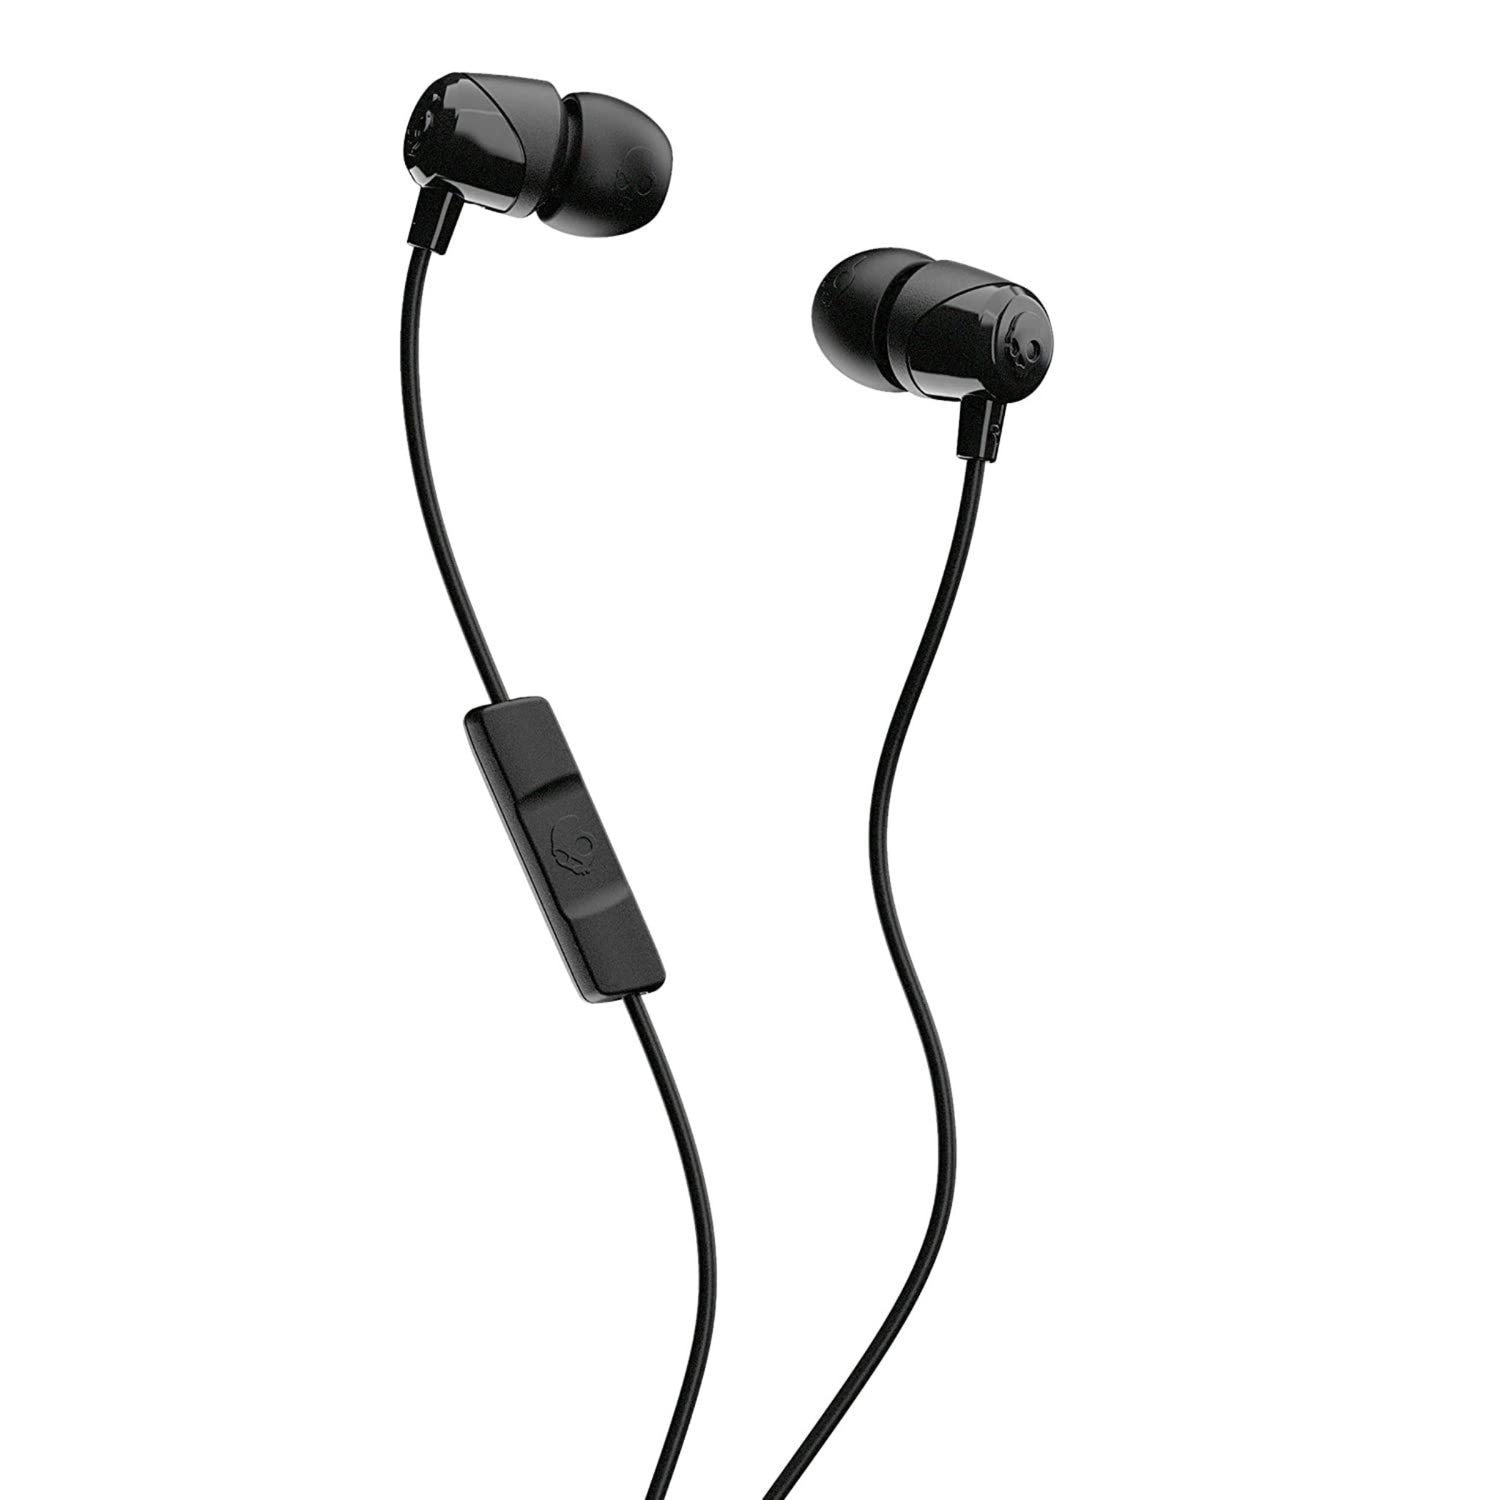 Skullcandy earbuds with microphone jib